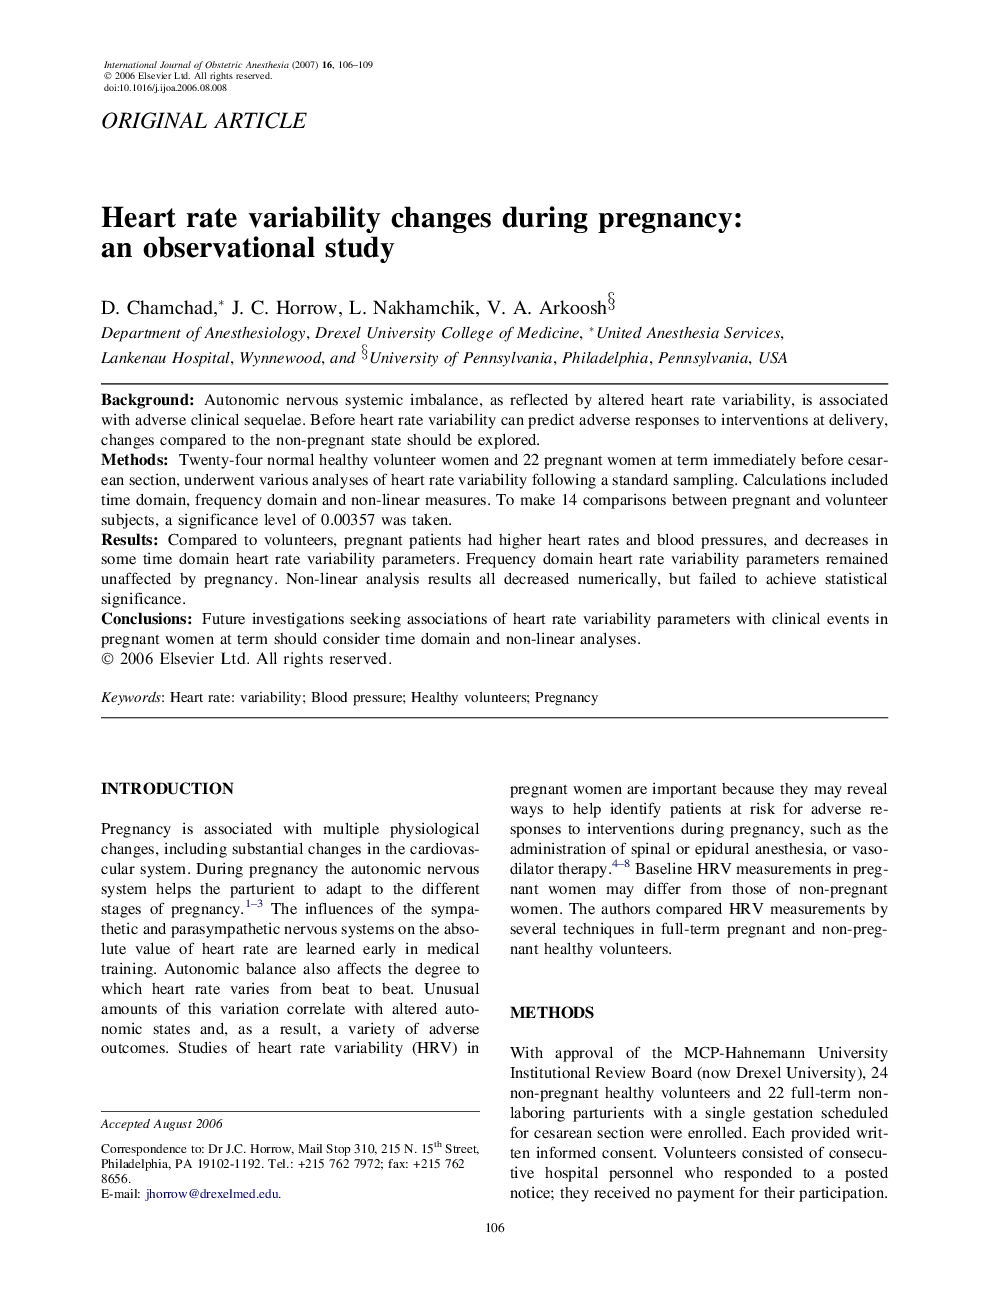 Heart rate variability changes during pregnancy: an observational study